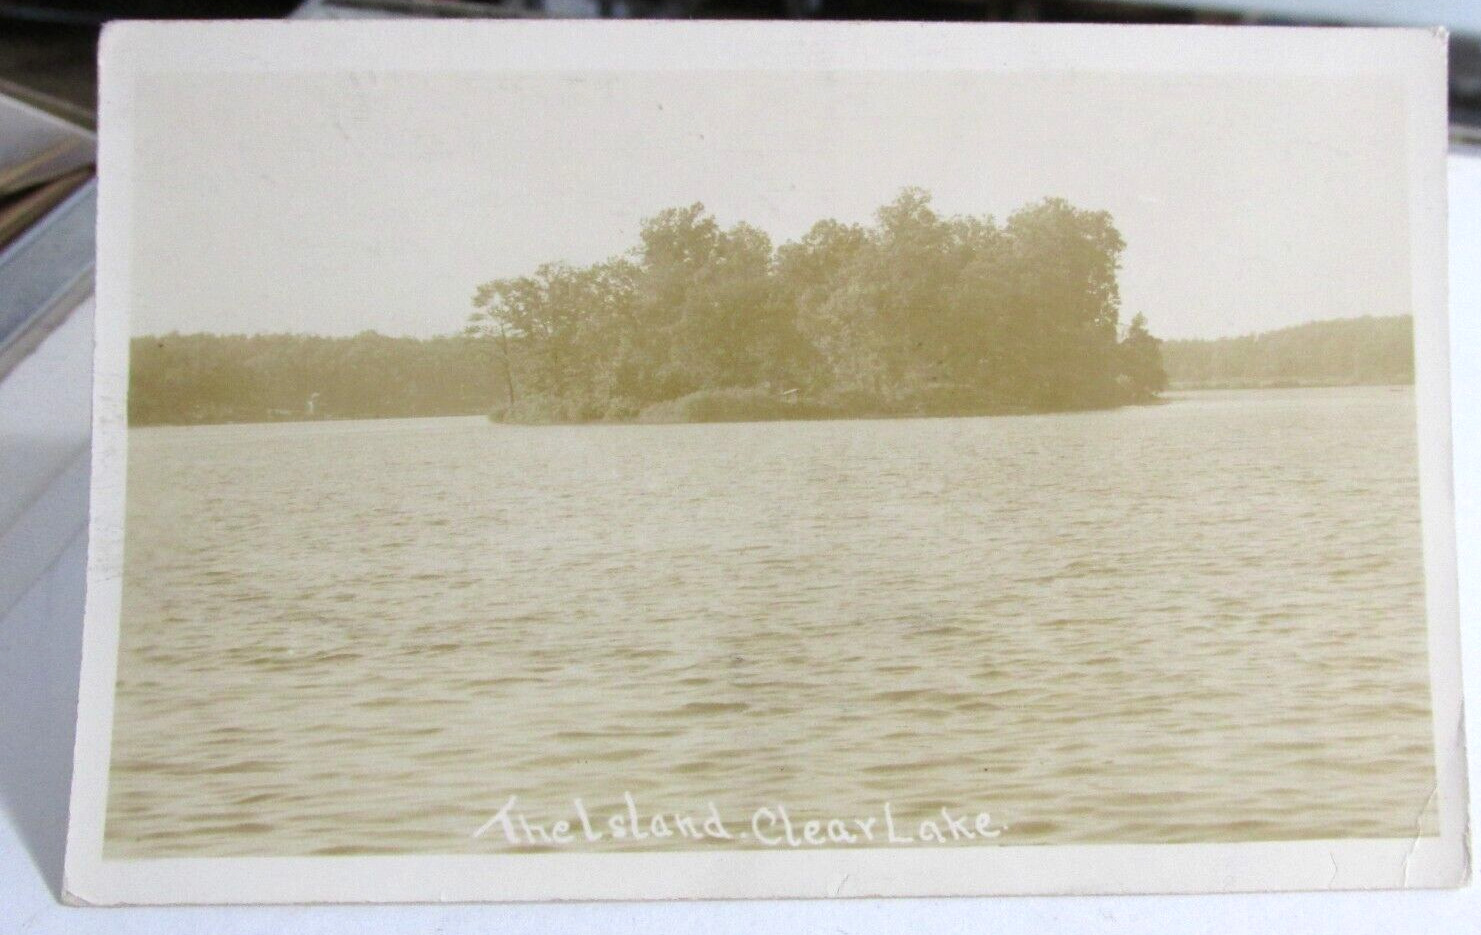 1944 CLEAR LAKE RAY INDIANA RPPC Real Photo Postcard The Island Clear Lake In.